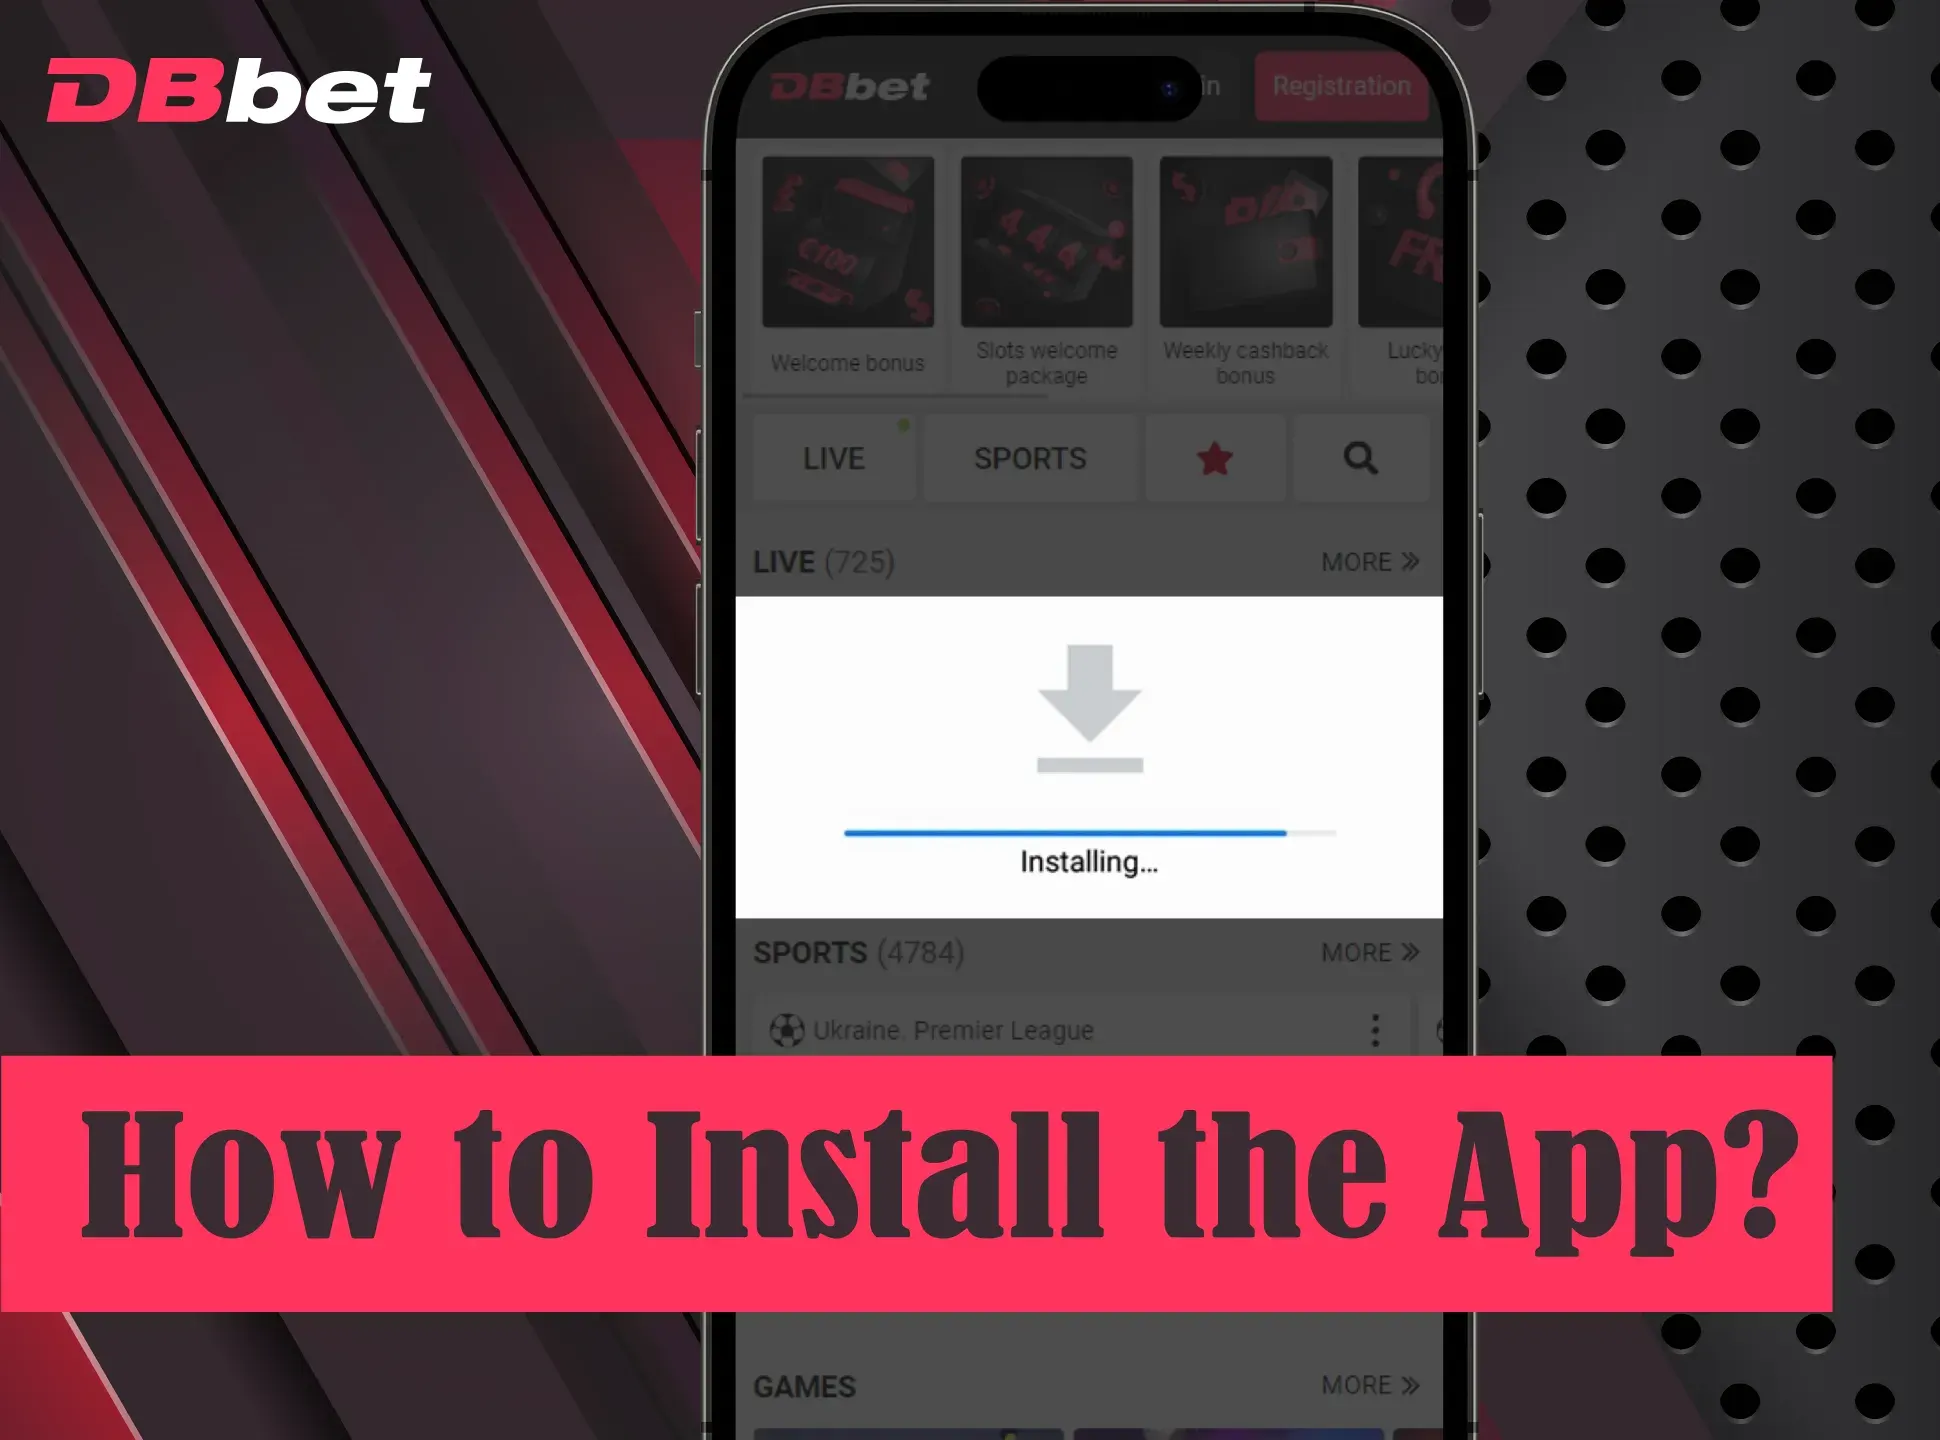 It's easy to install DBbet app on your mobile phone.